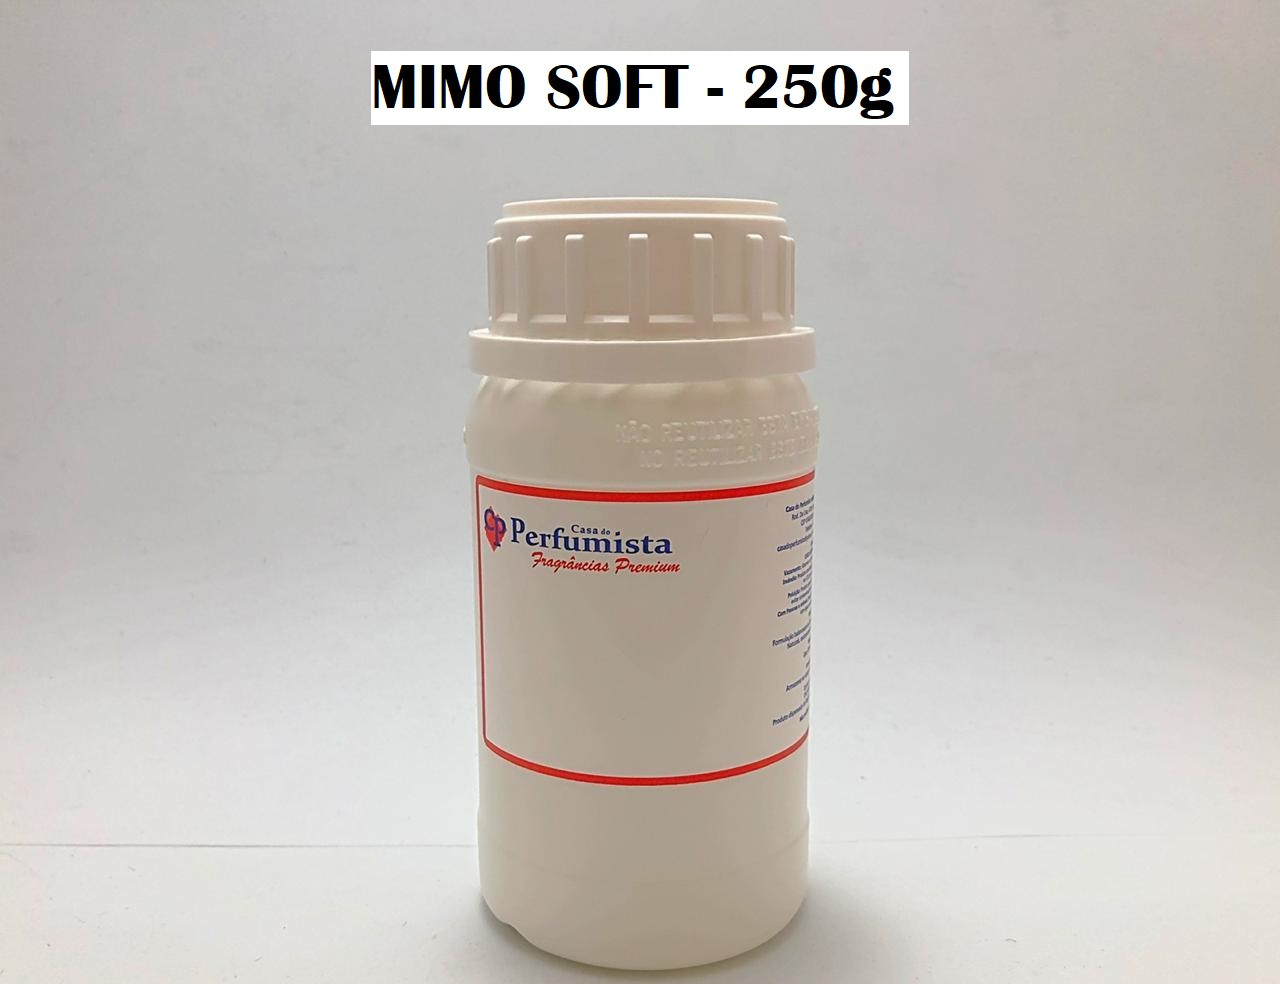 MIMO SOFT - 250g